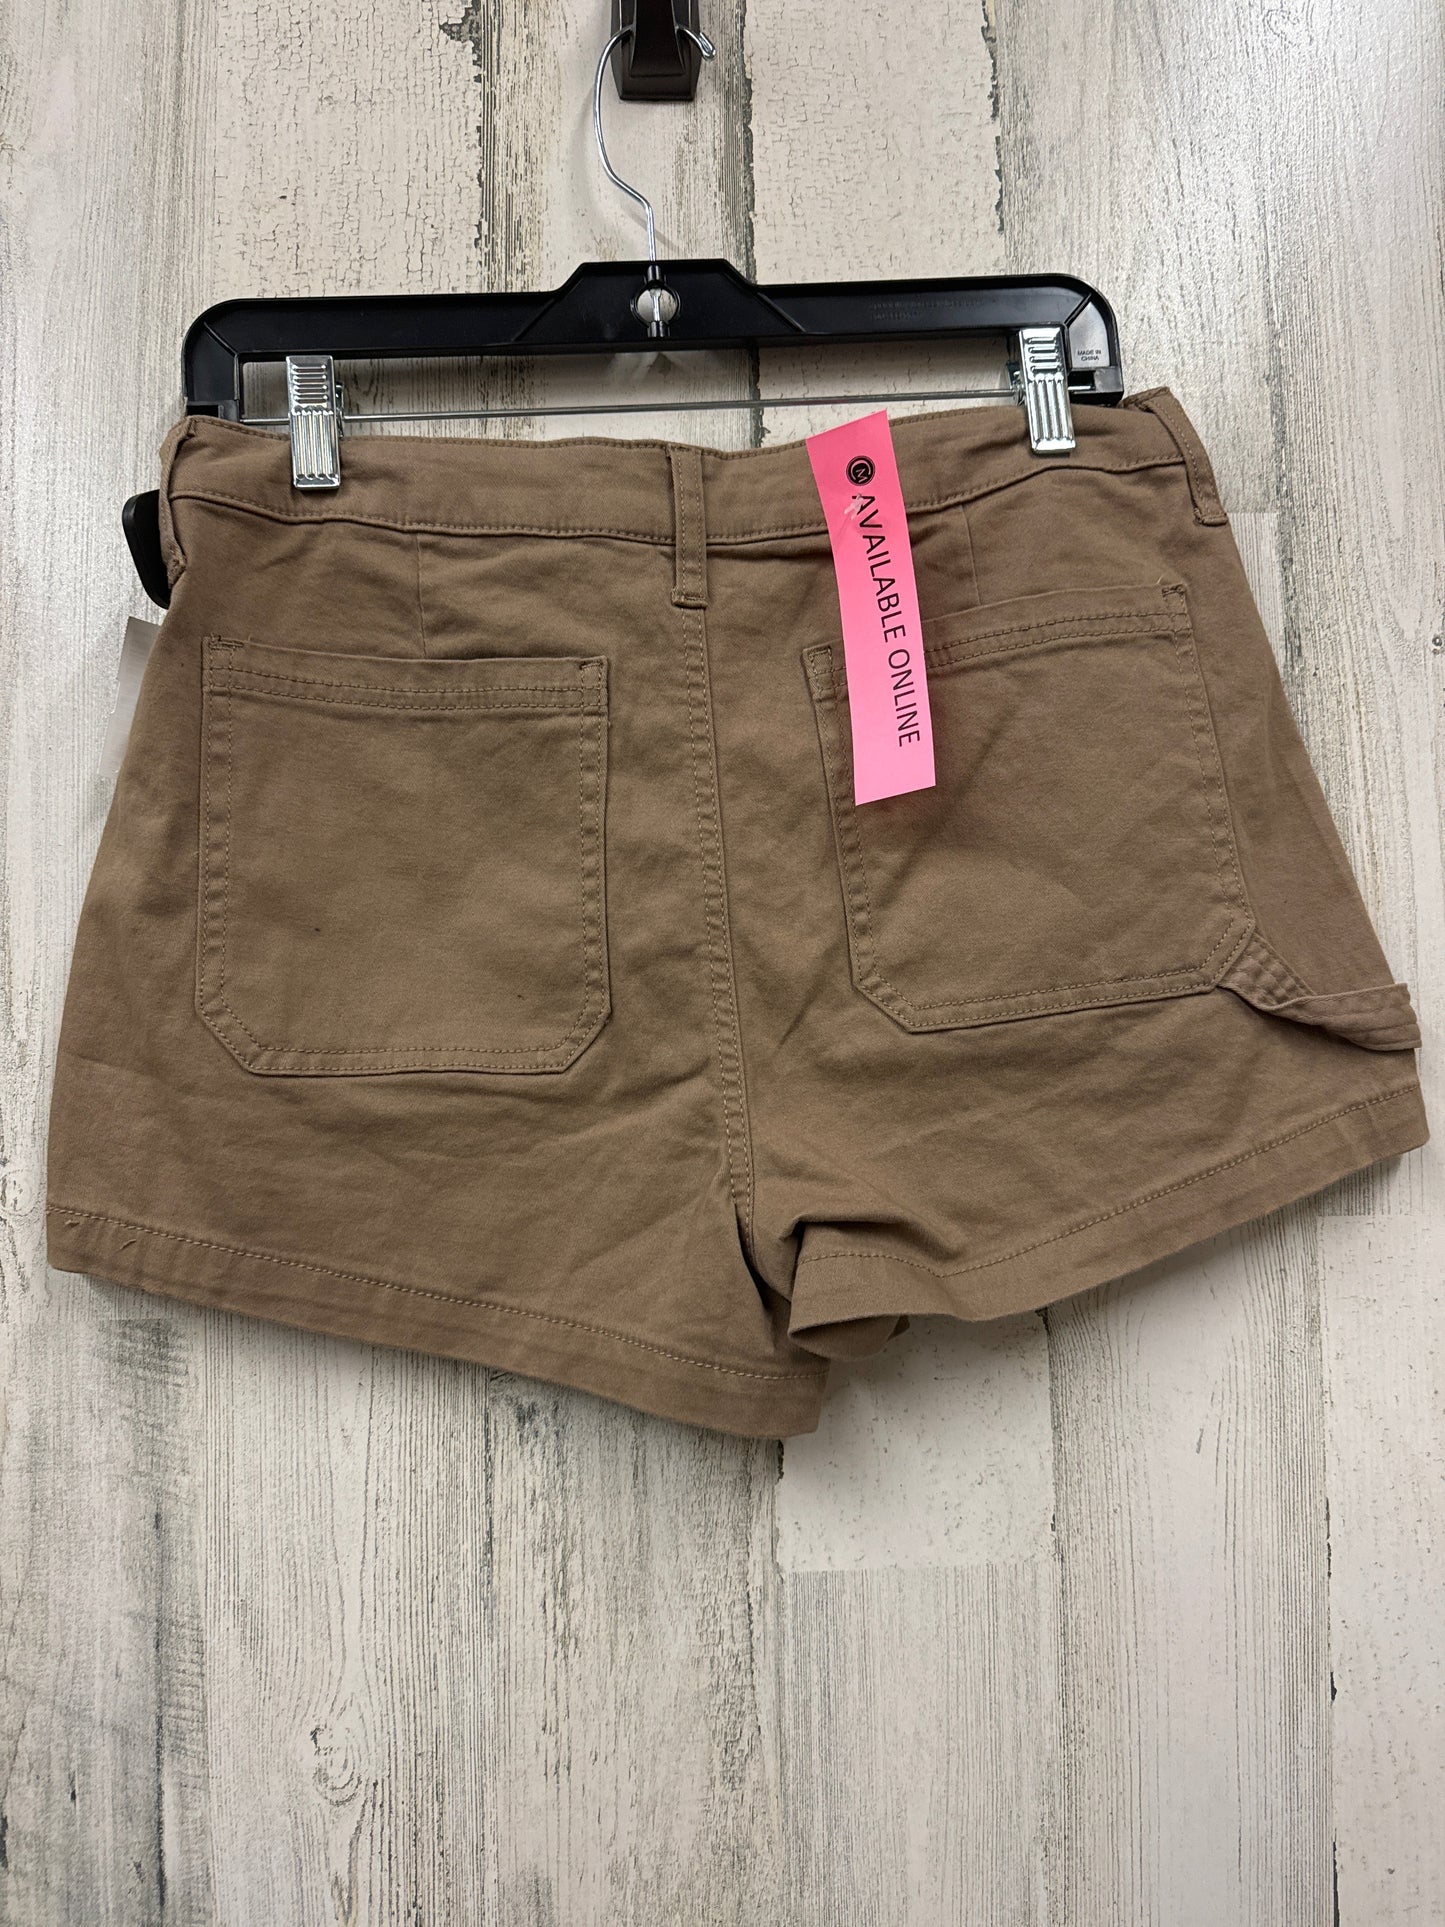 Brown Shorts Celebrity Pink, Size 8